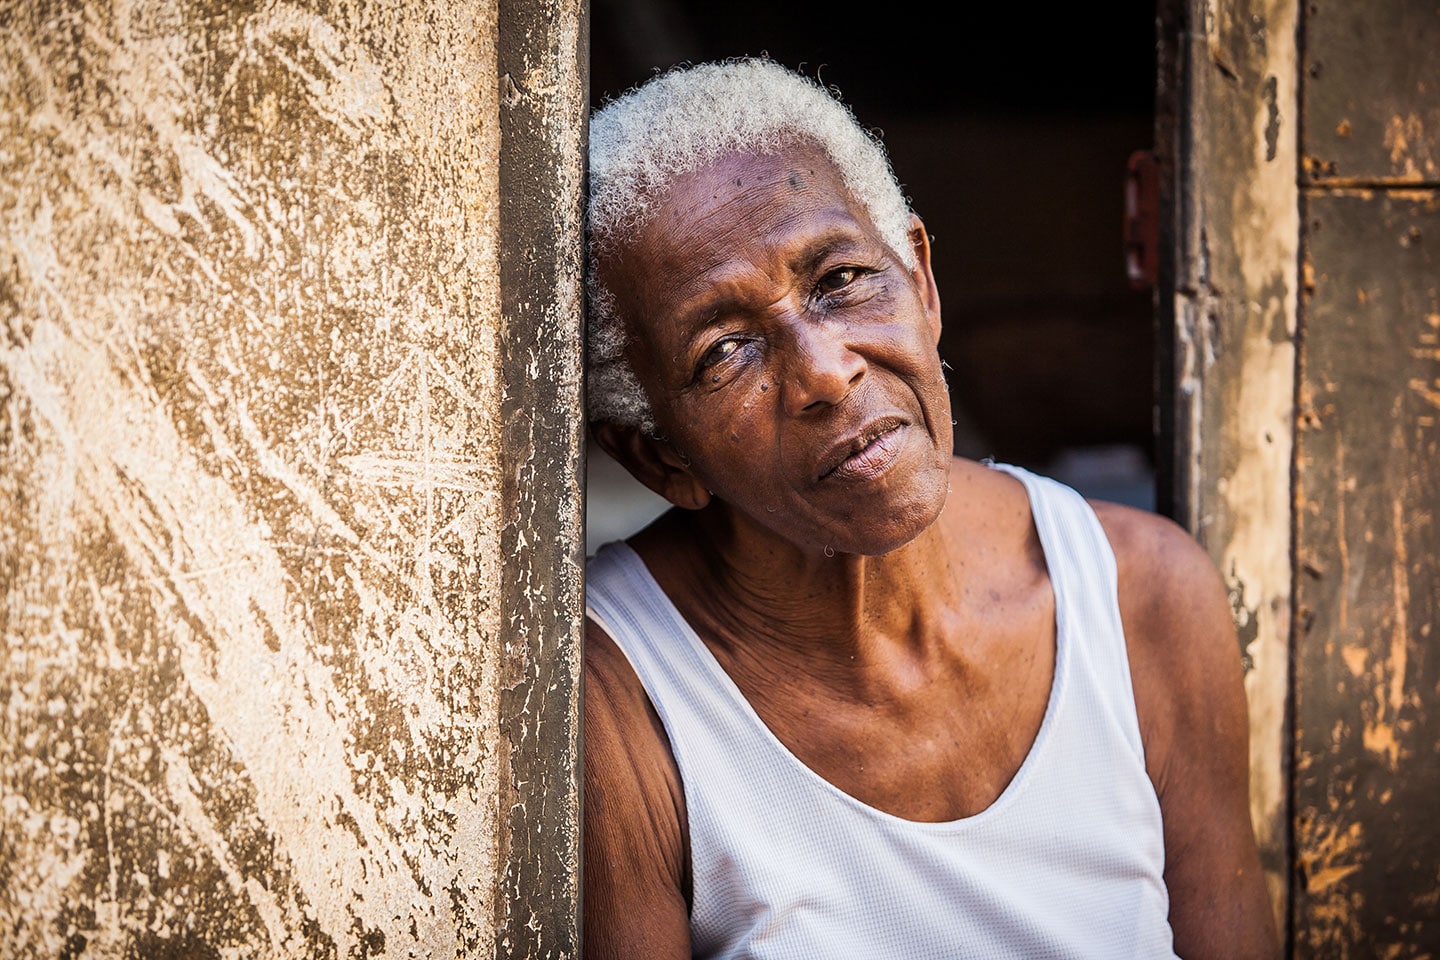 Old woman in the streets of Trinidad, Cuba